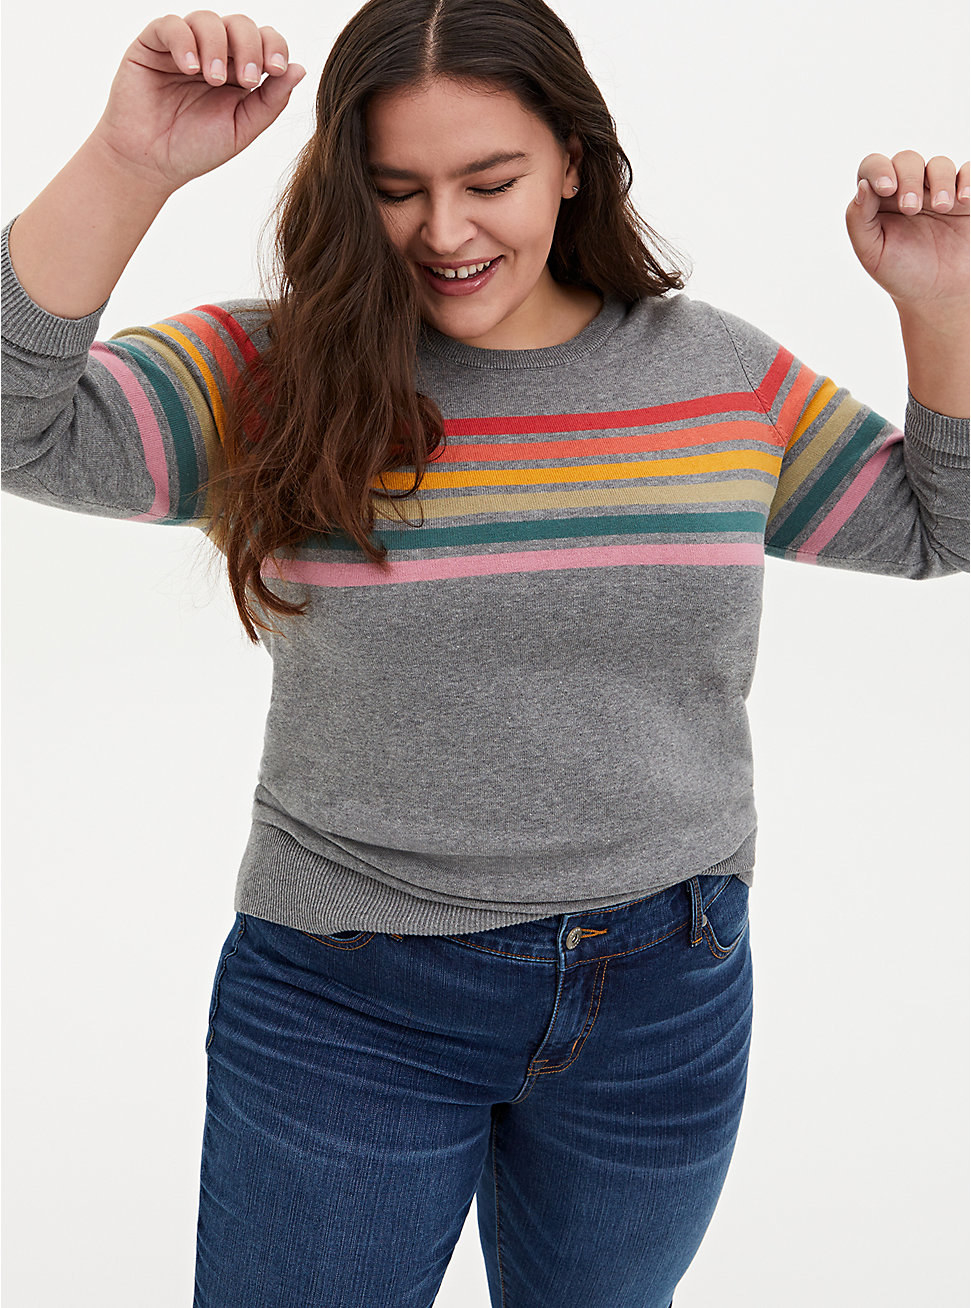 a model in a gray sweater with rainbow horizontal stripes